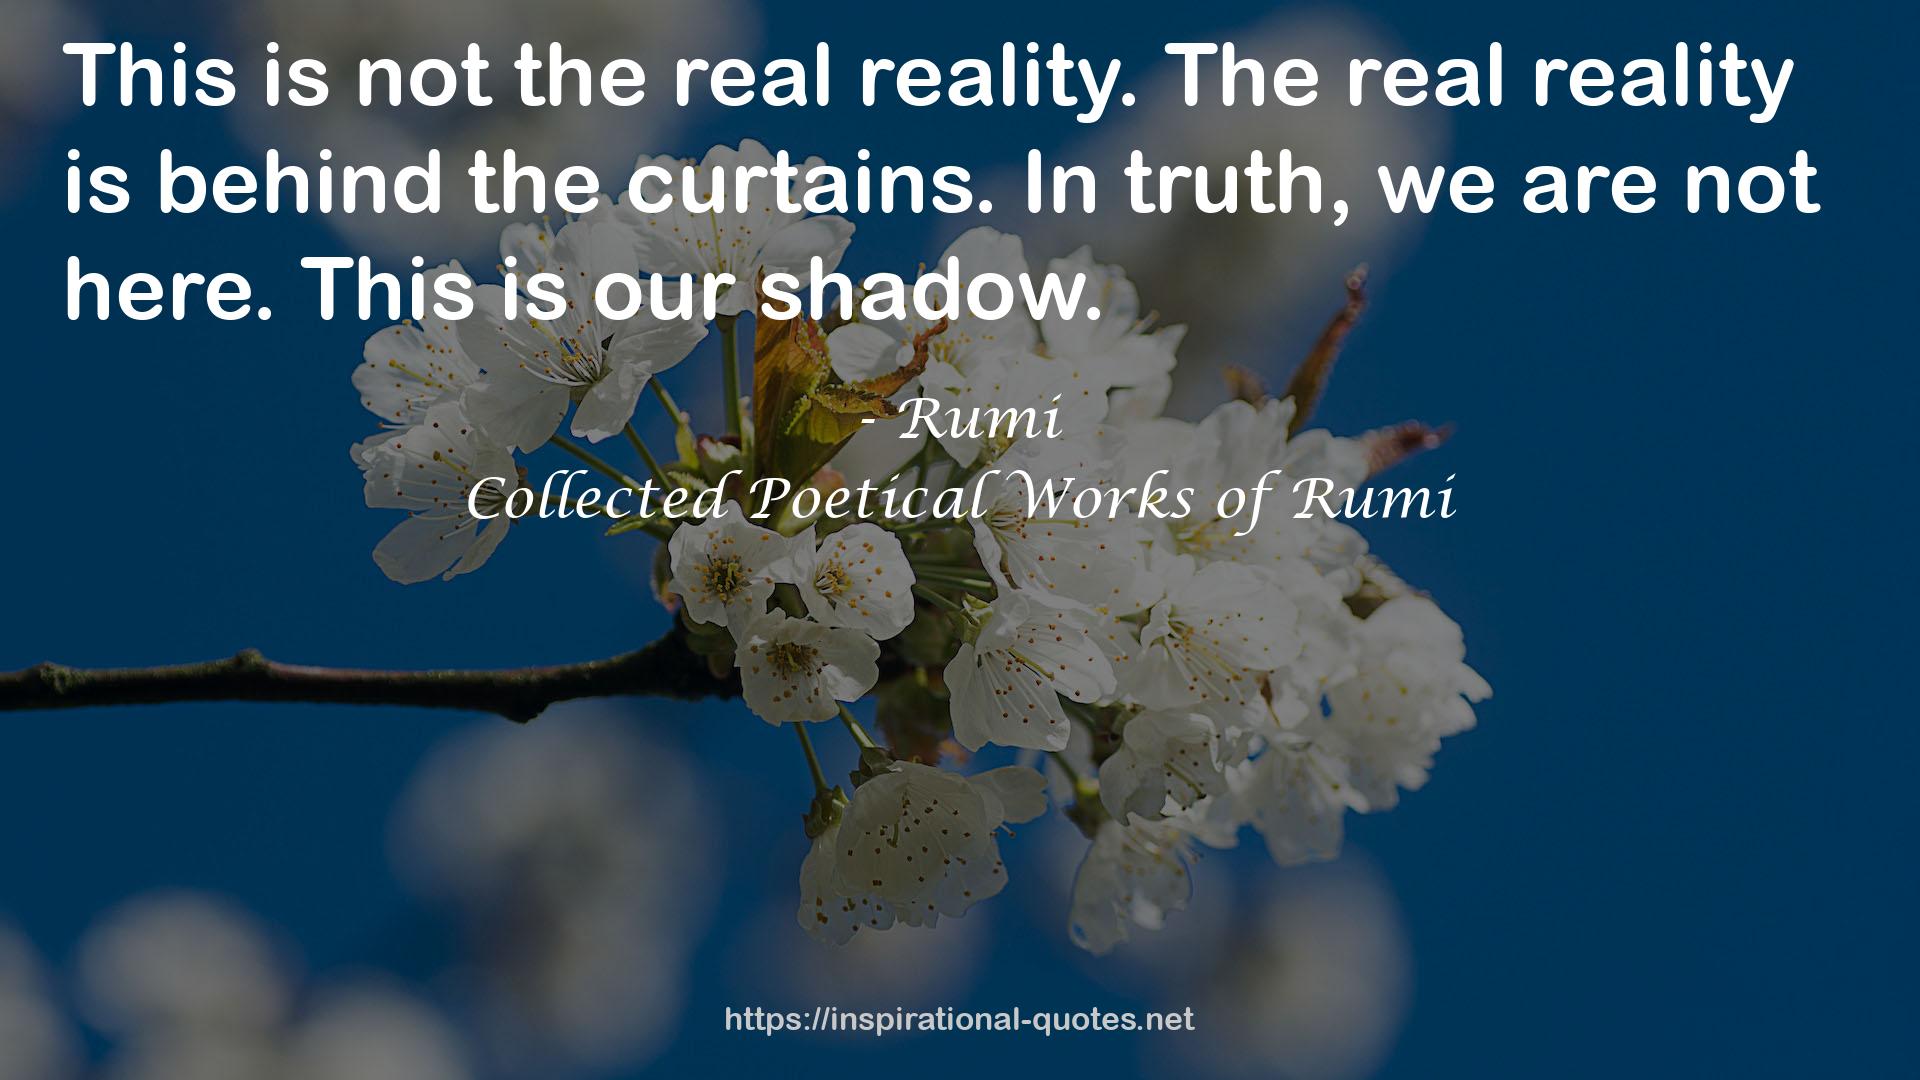 Collected Poetical Works of Rumi QUOTES